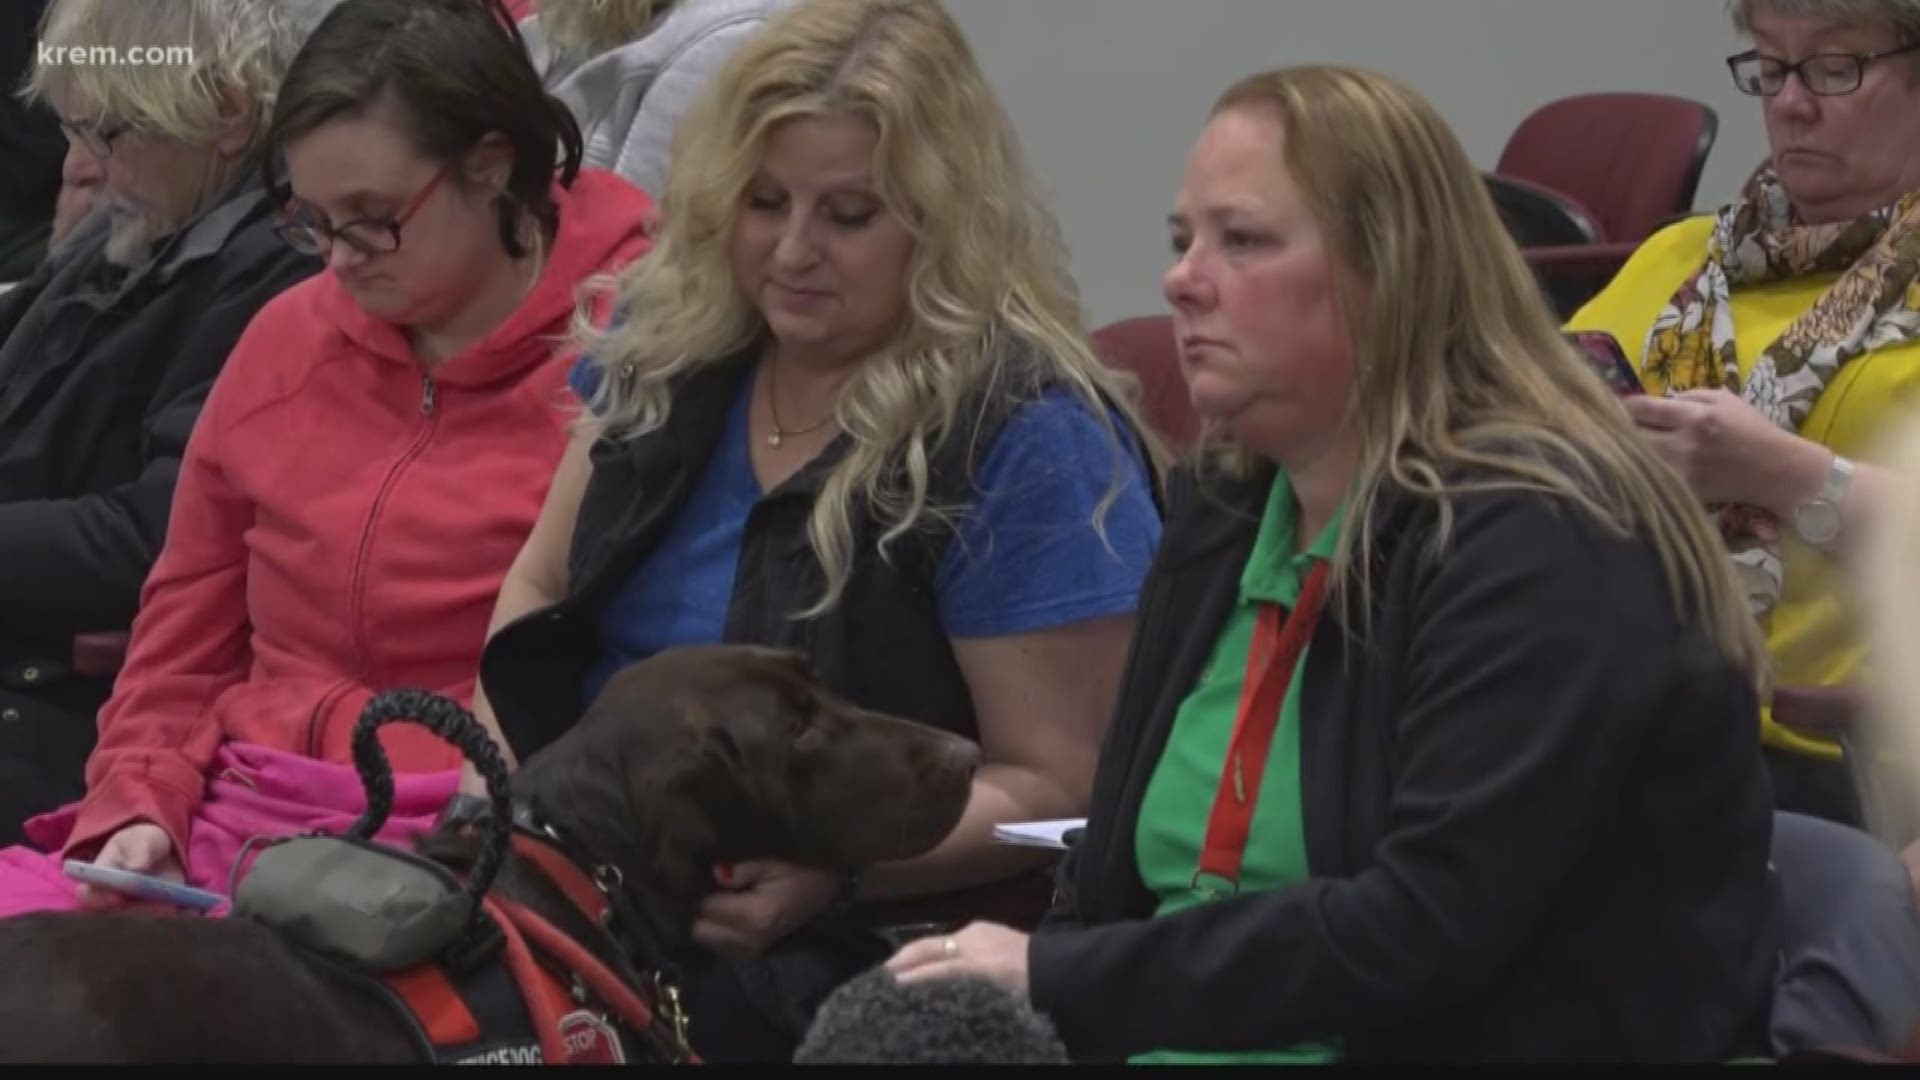 The ordinance allows an enforcement officer or owner of a public accommodation to ask if a service animal is required because of a disability and what task the animal is trained to do.